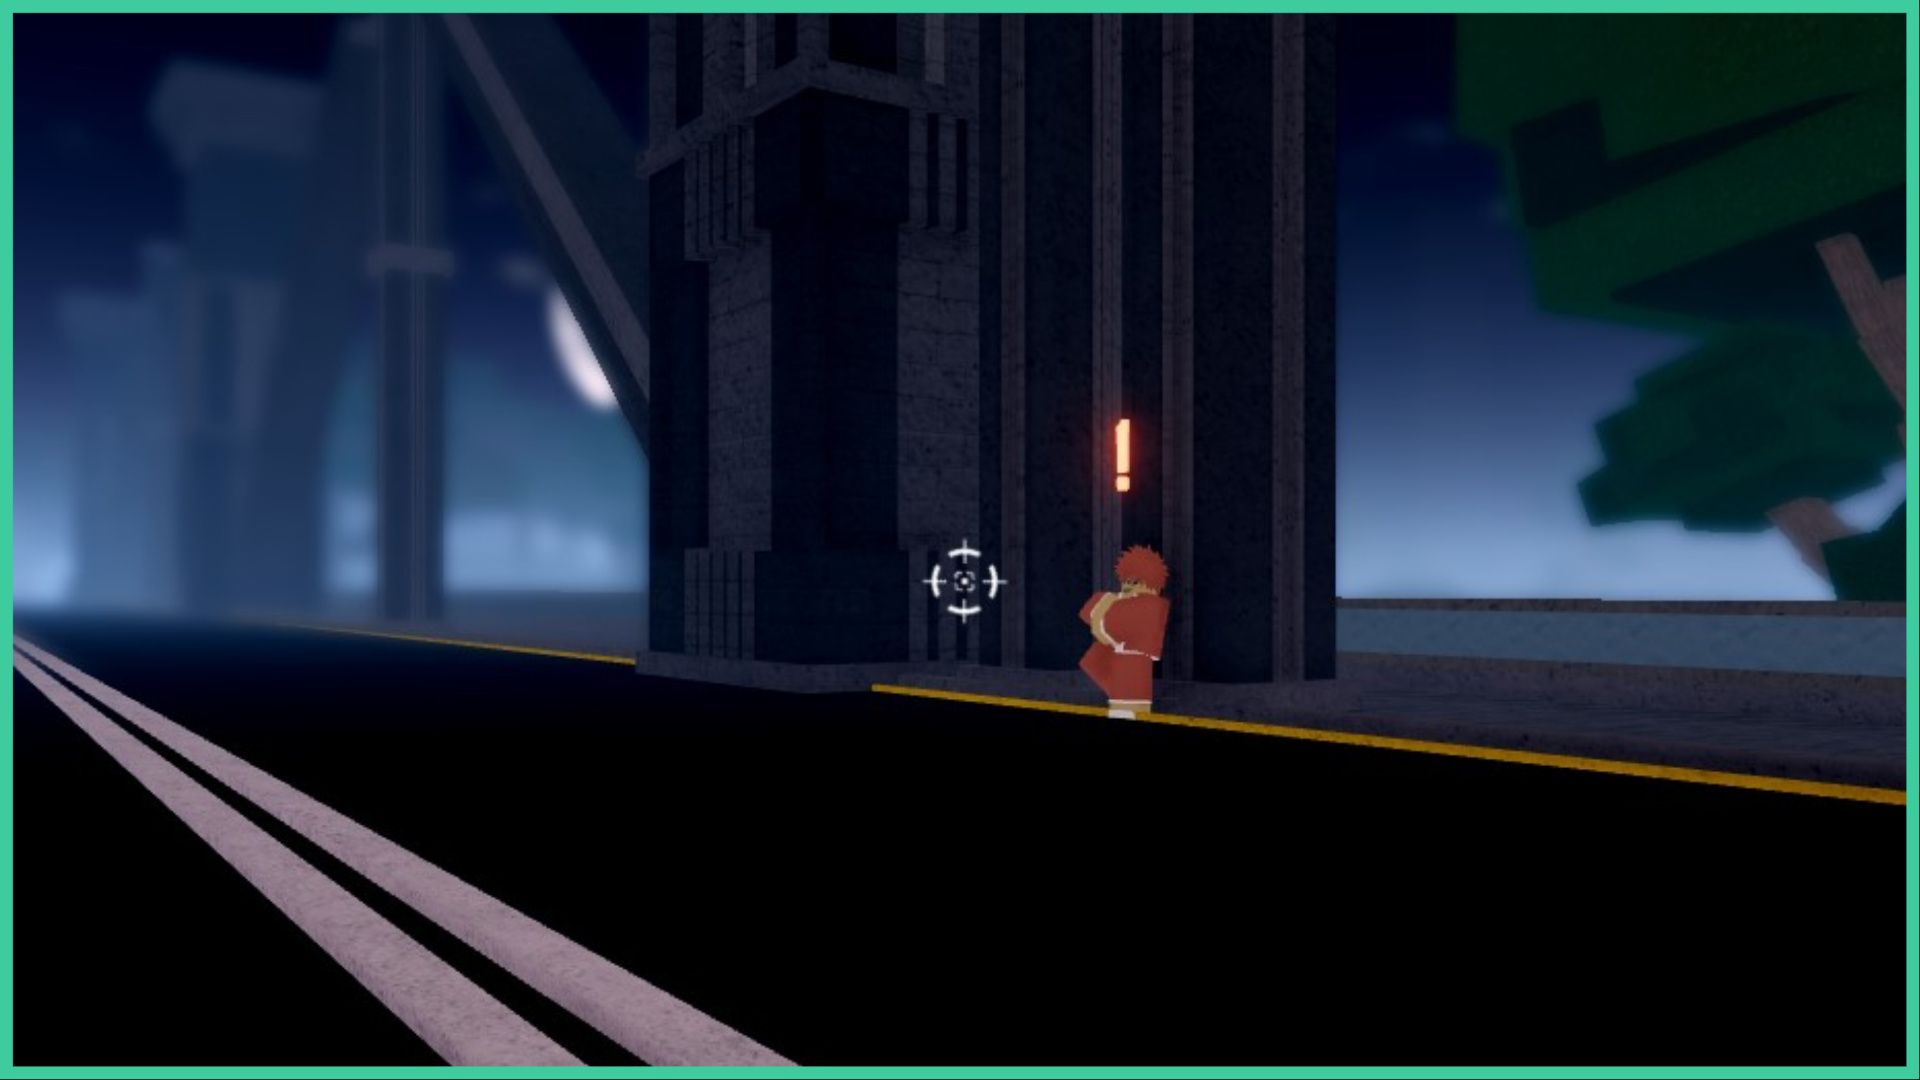 feature image for our project mugetsu gravitas guide, the image is of a character standing on a road bridge leaning against one of the pillars that support the bridge with his arms crossed and one foot up on the wall, he has an orange jumpsuit on with spikey orange hair and a glowing exclamation mark above his head, you can see a part of the moon in the distance